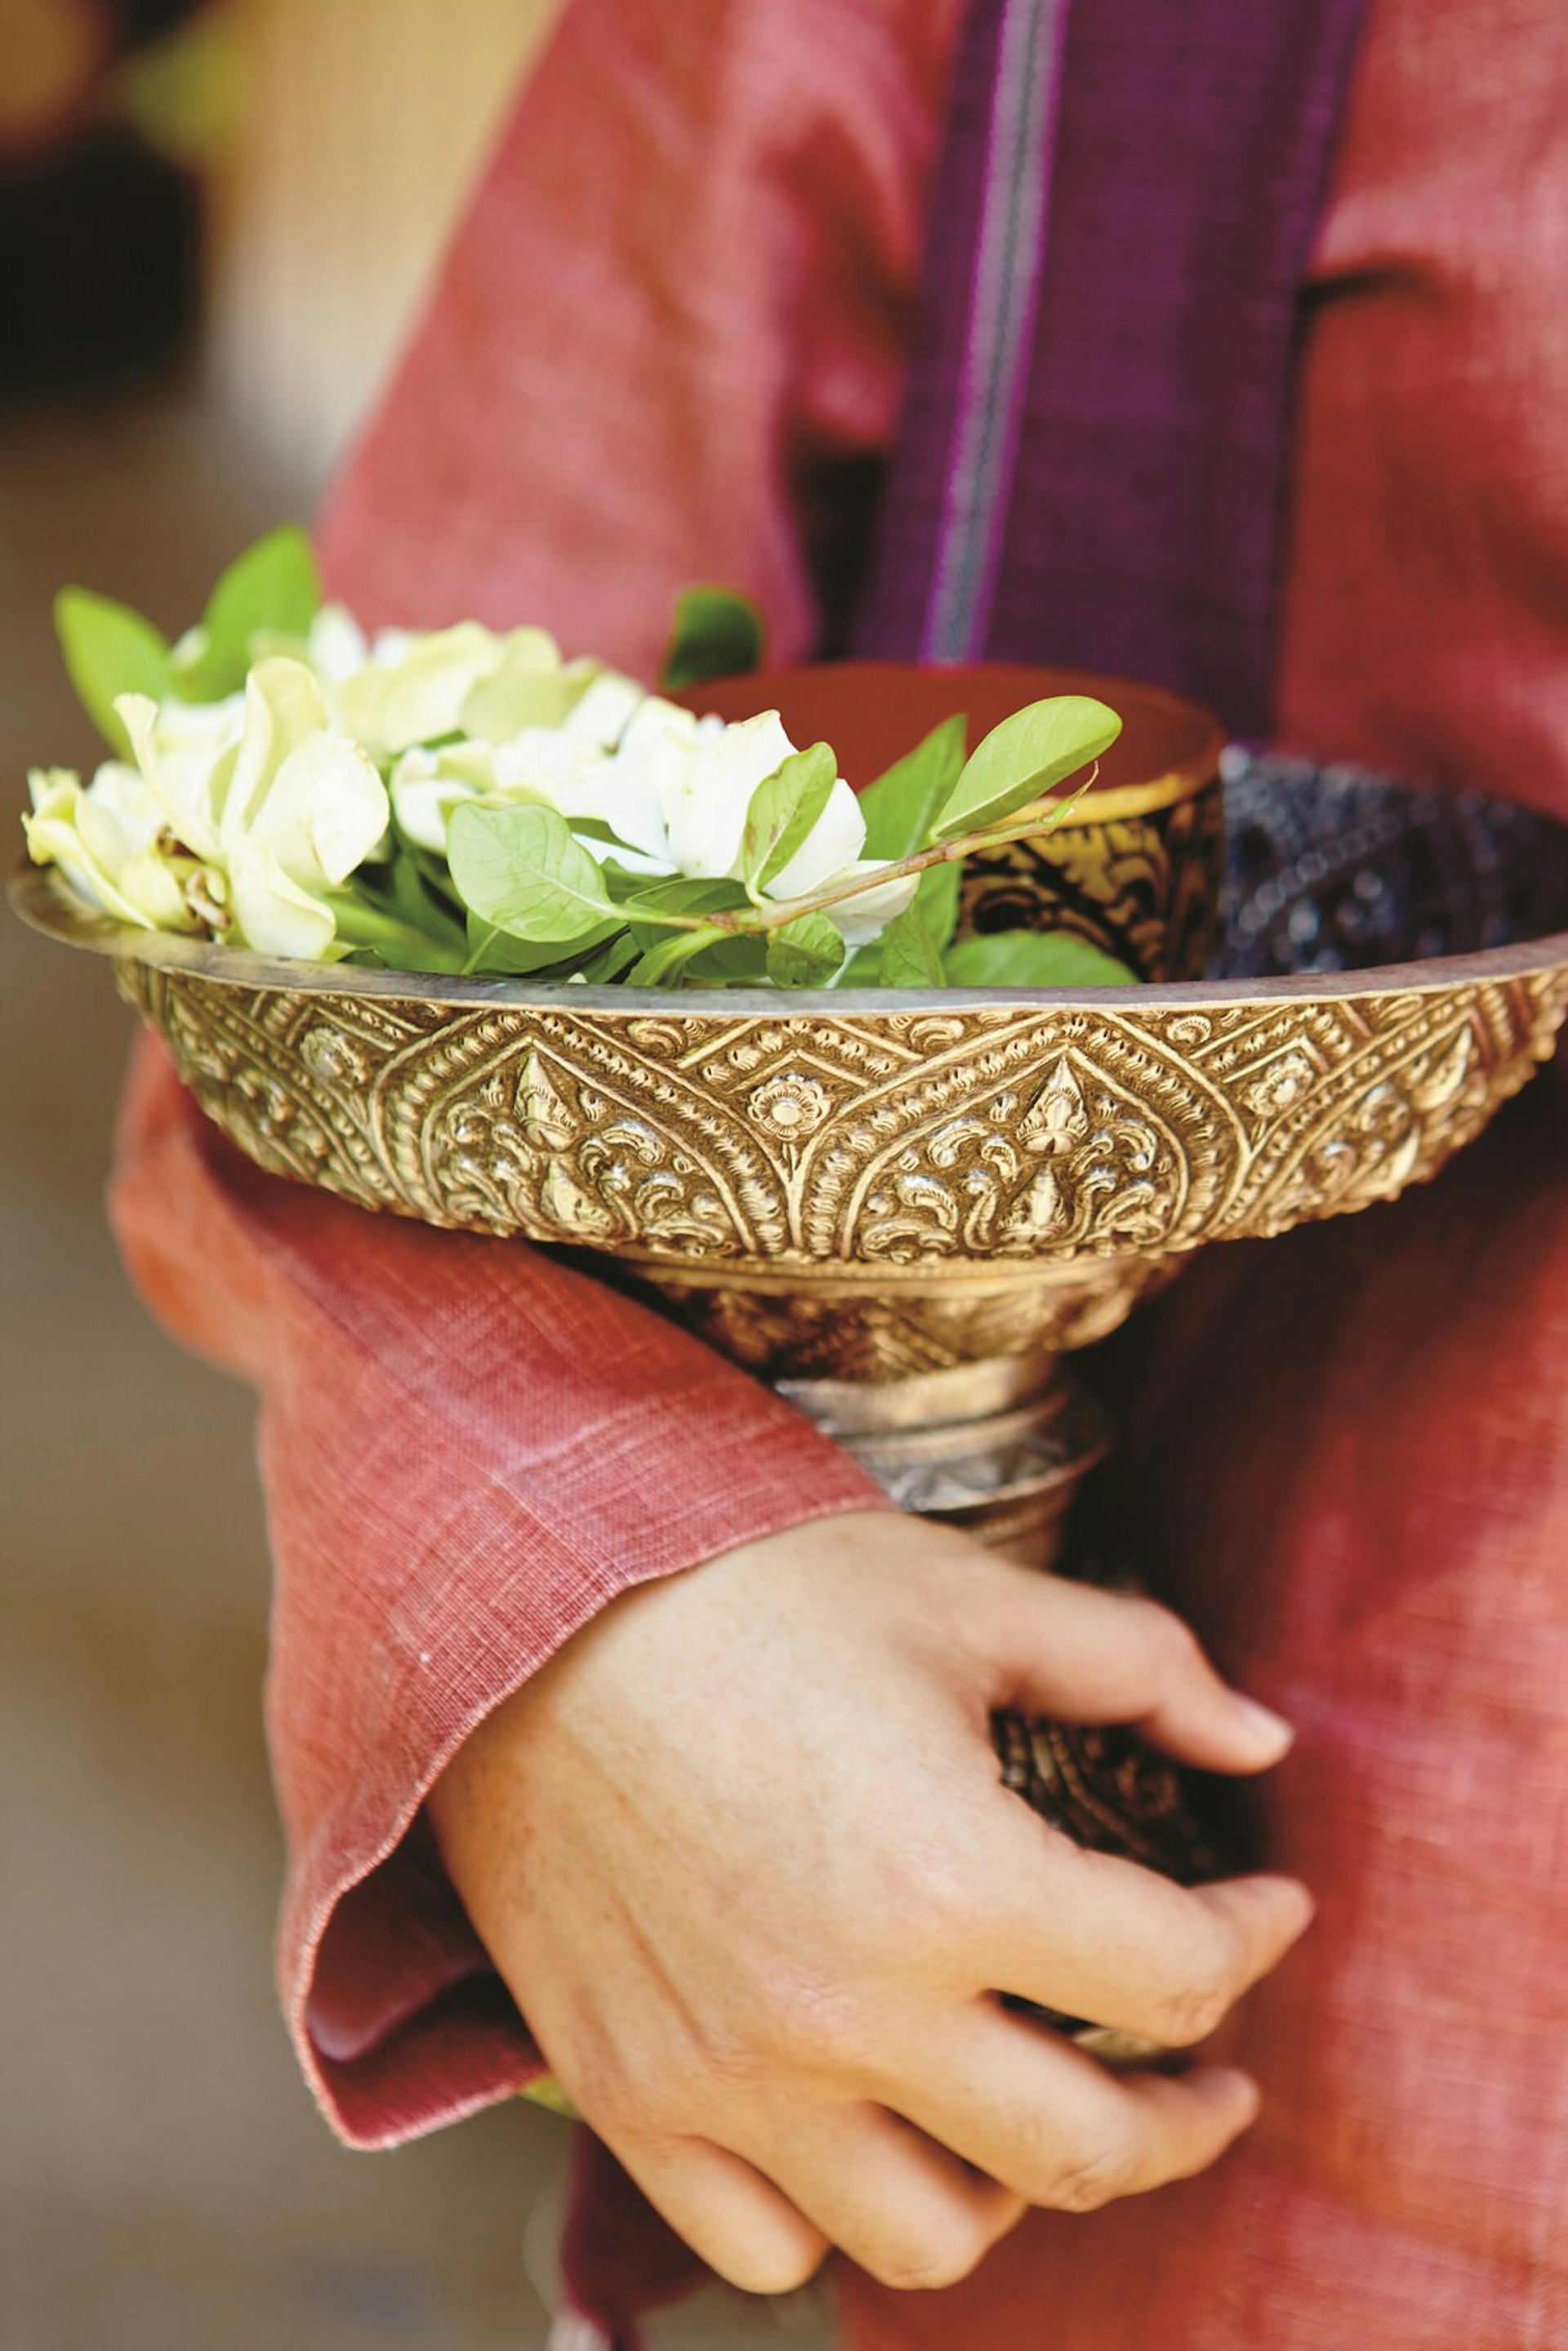 A temple offering of colourful flowers is contained within an ornate bowl © Matt Munro / Lonely Planet